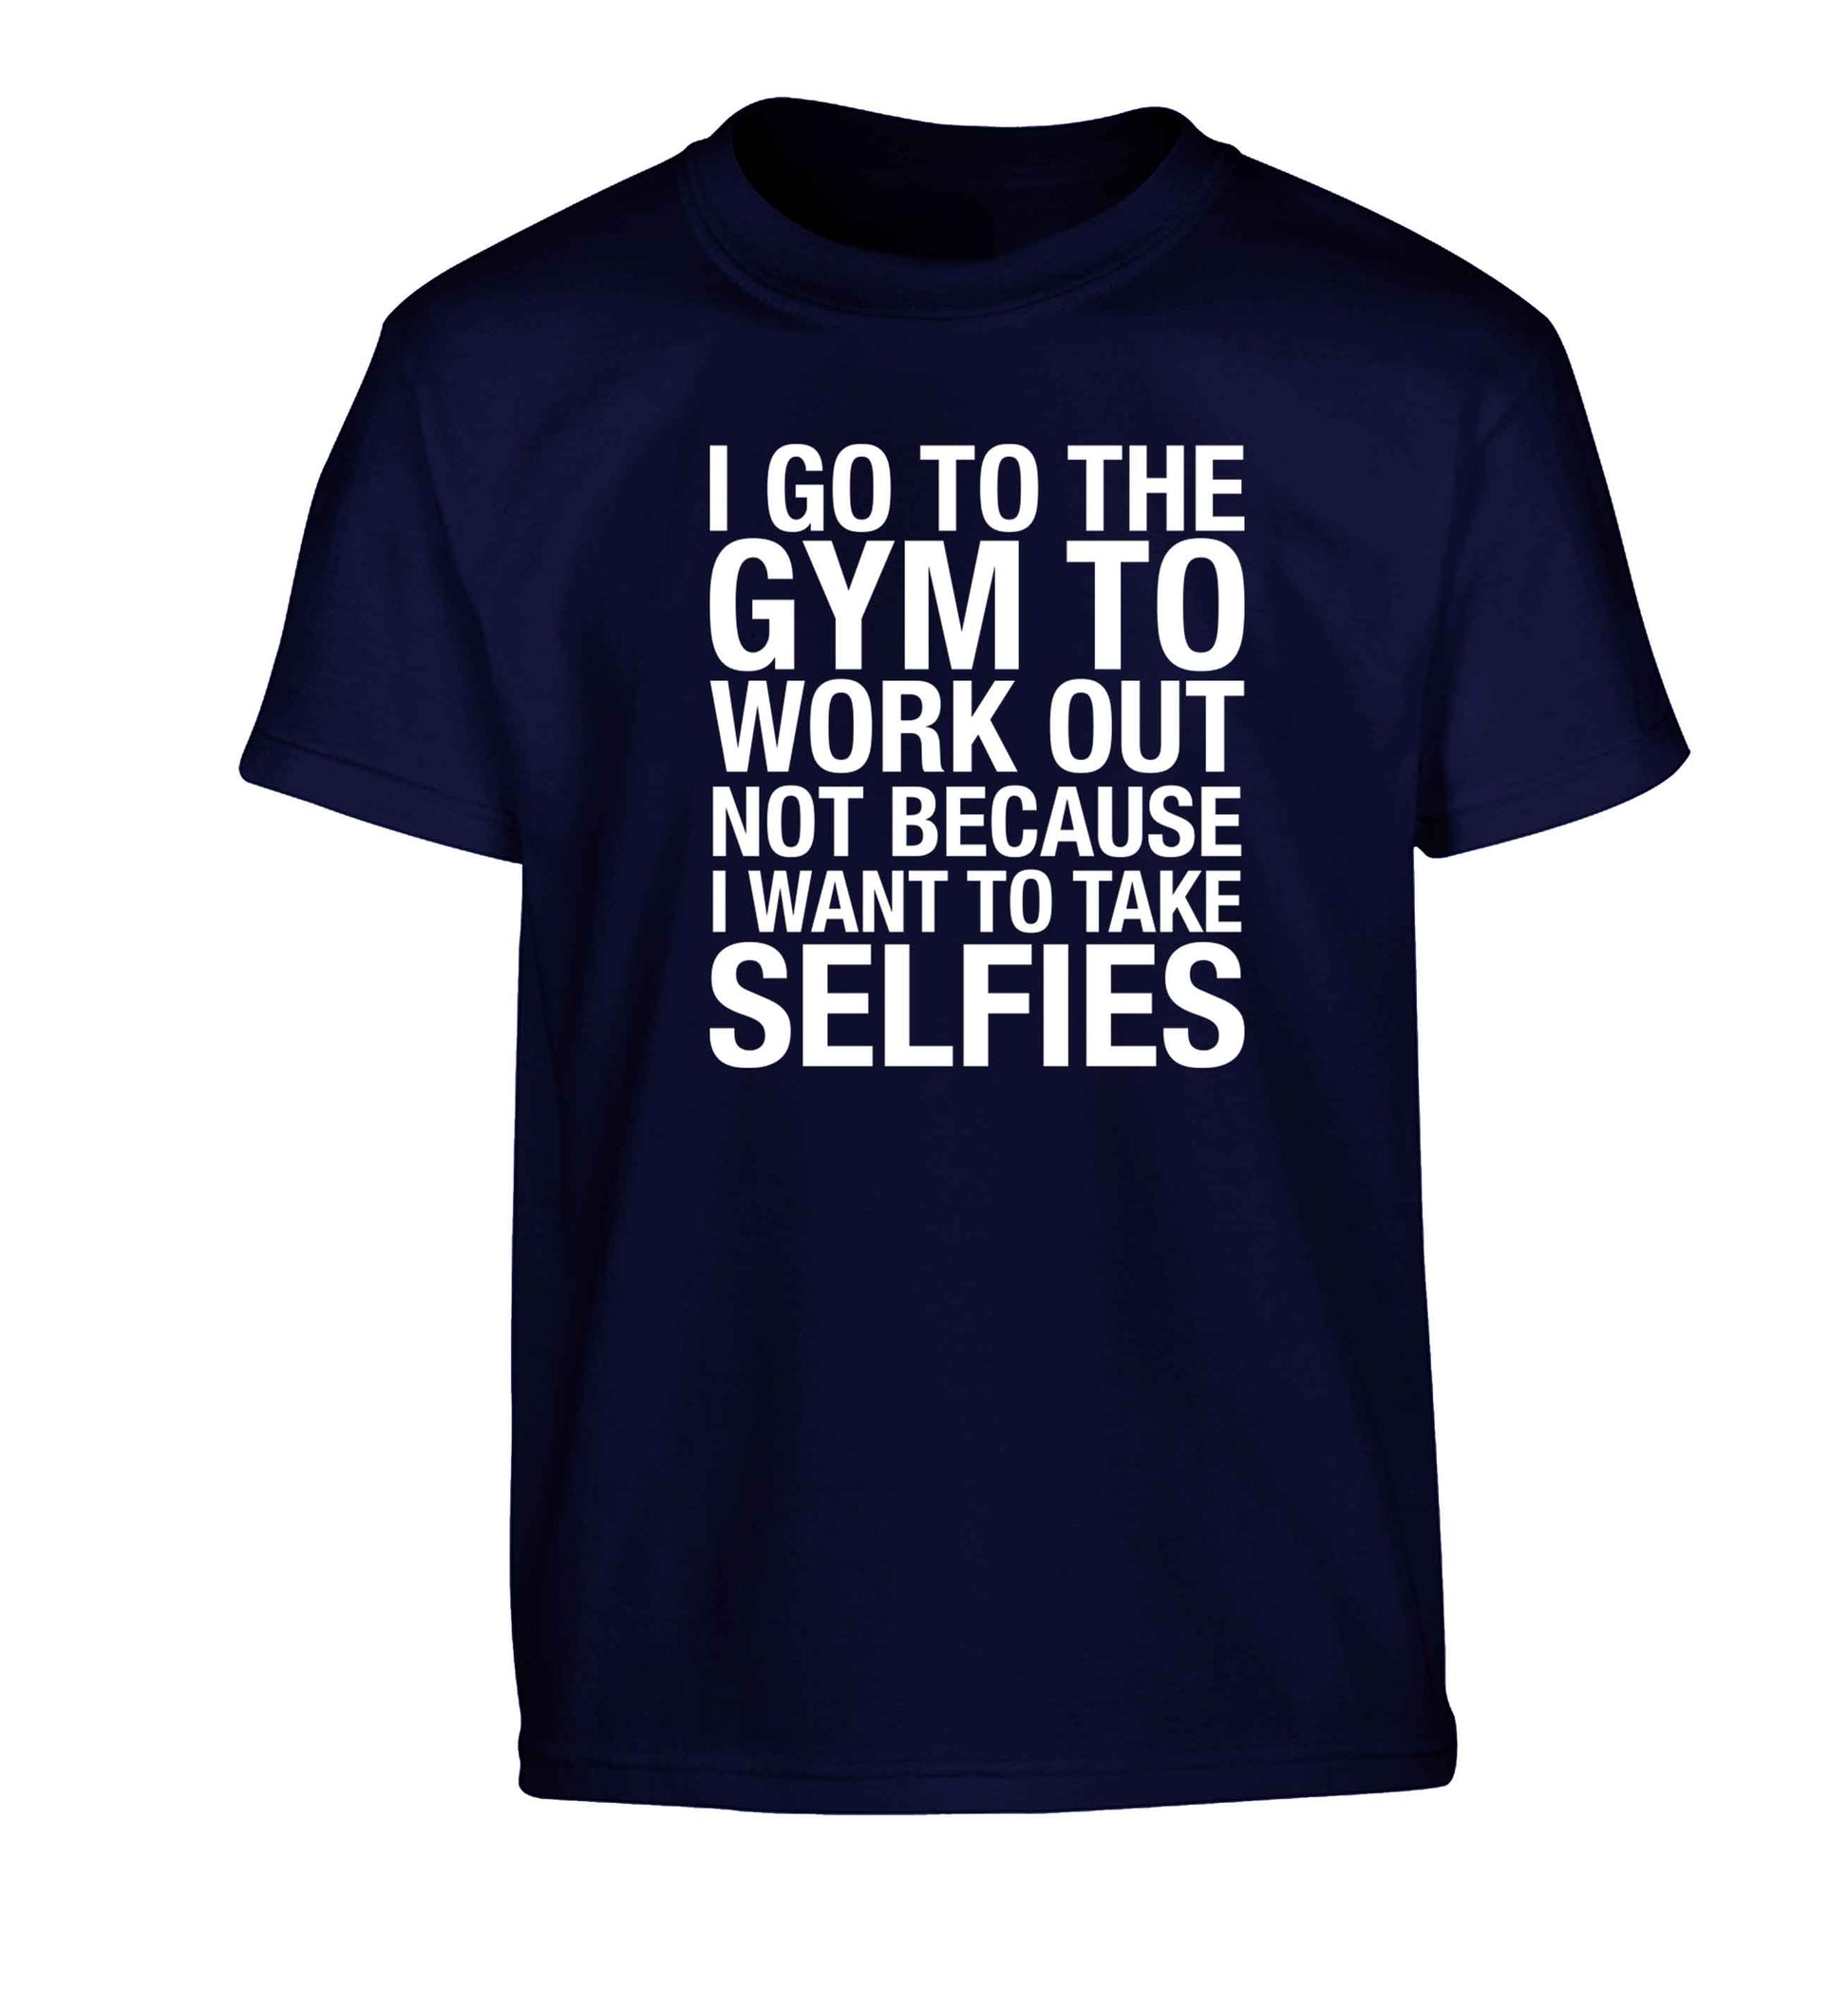 I go to the gym to workout not to take selfies Children's navy Tshirt 12-13 Years